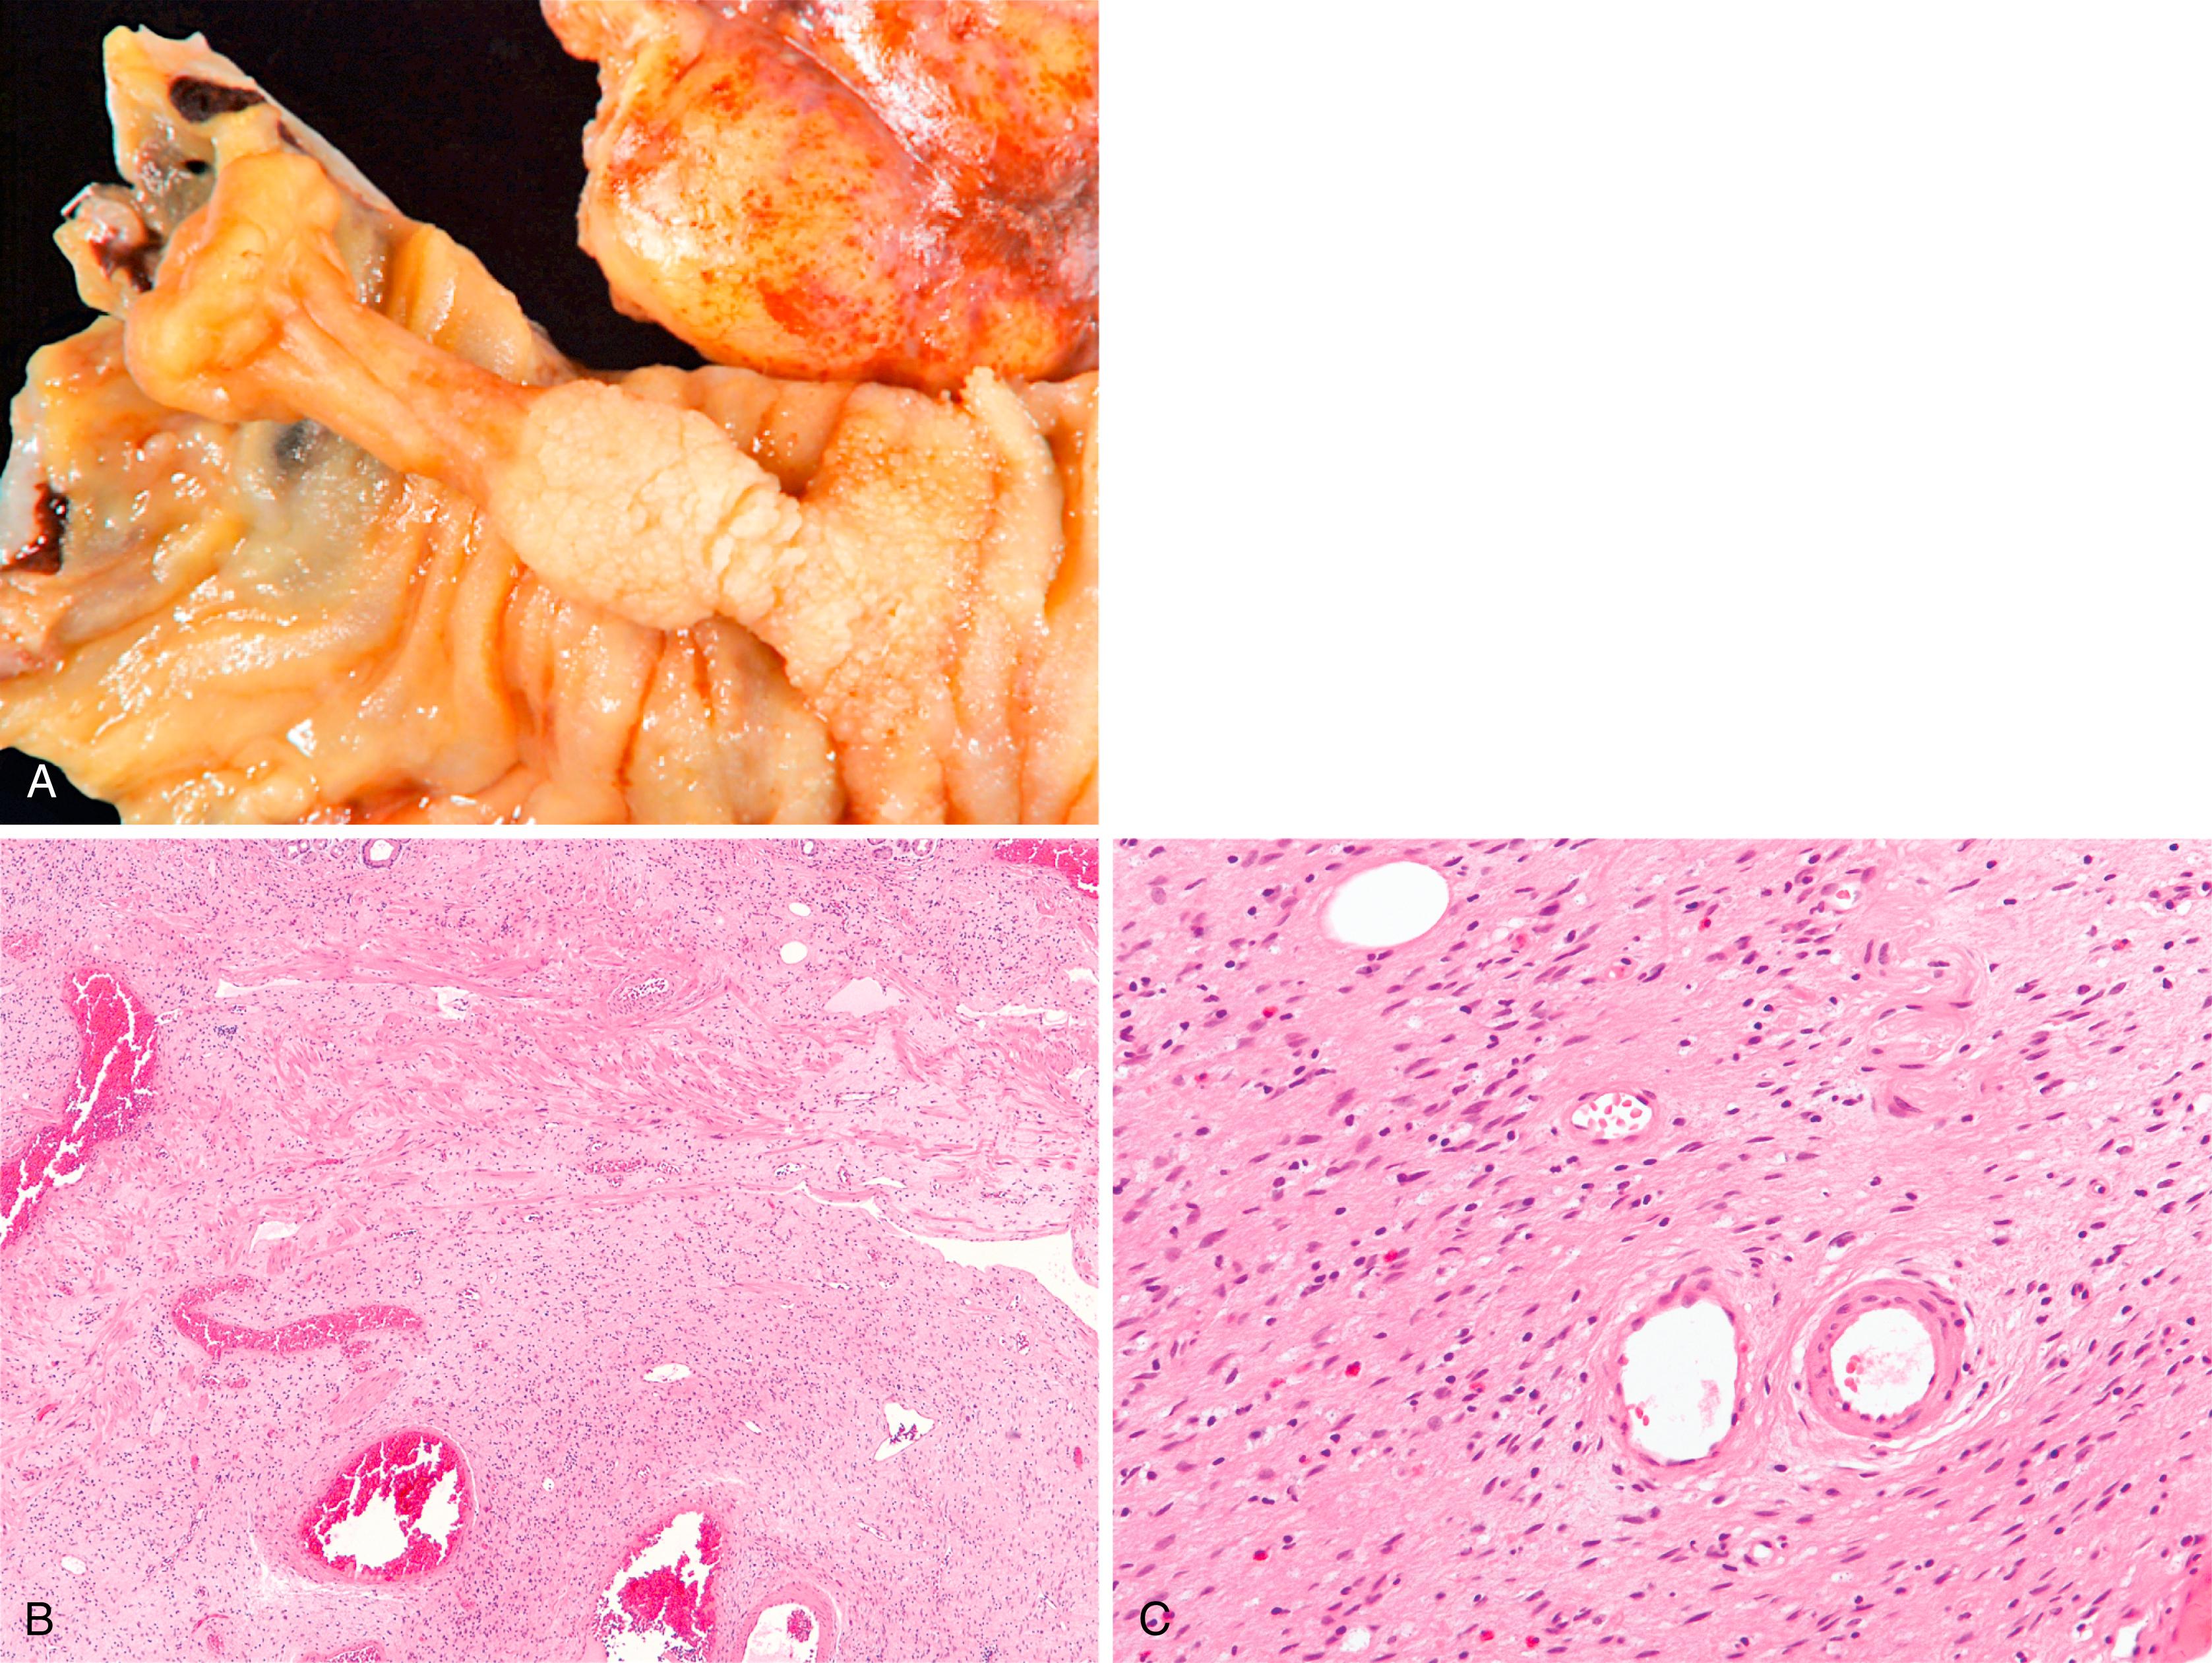 FIGURE 21.4, Inflammatory fibroid polyp of the duodenum. A, A well-circumscribed polyp is present in the submucosa. B and C, The tumor is composed of cytologically bland spindle cells with prominent eosinophils. A whorling pattern is present around some vessels within the lesion.